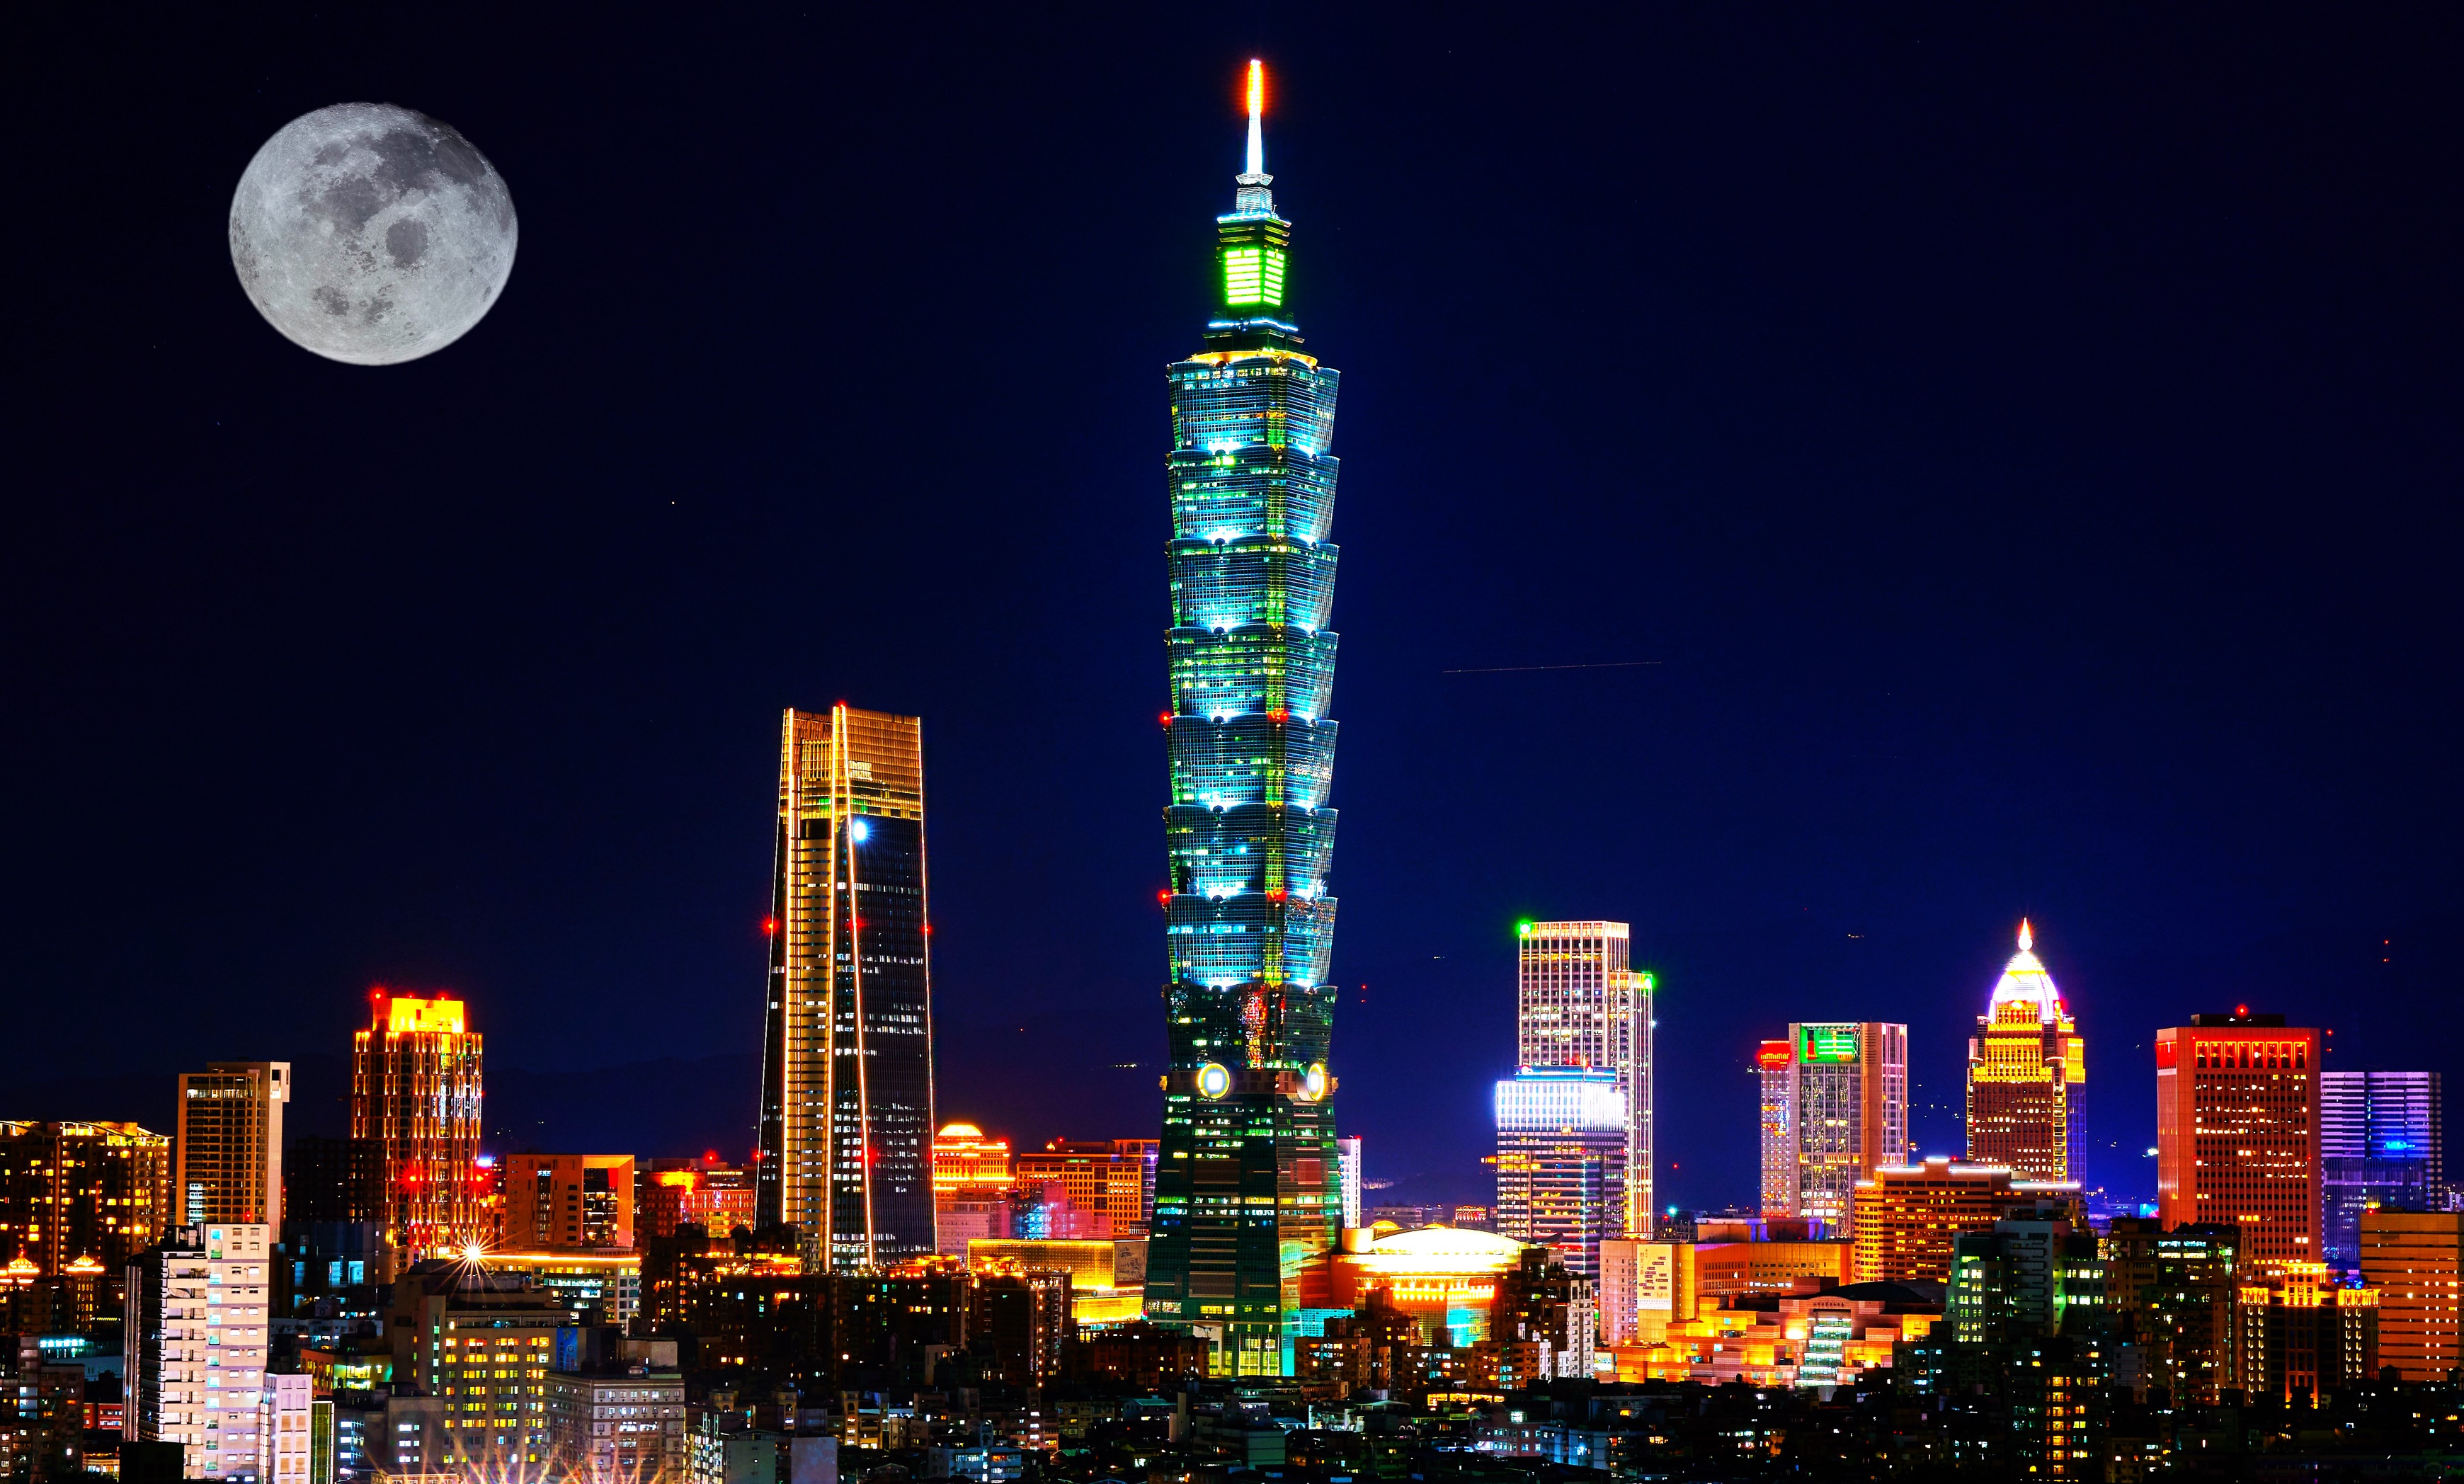 San Francisco to Taipei Taiwan $723 RT Airfares on Cathay Pacific (Very Few Departure Dates April & May 2023)